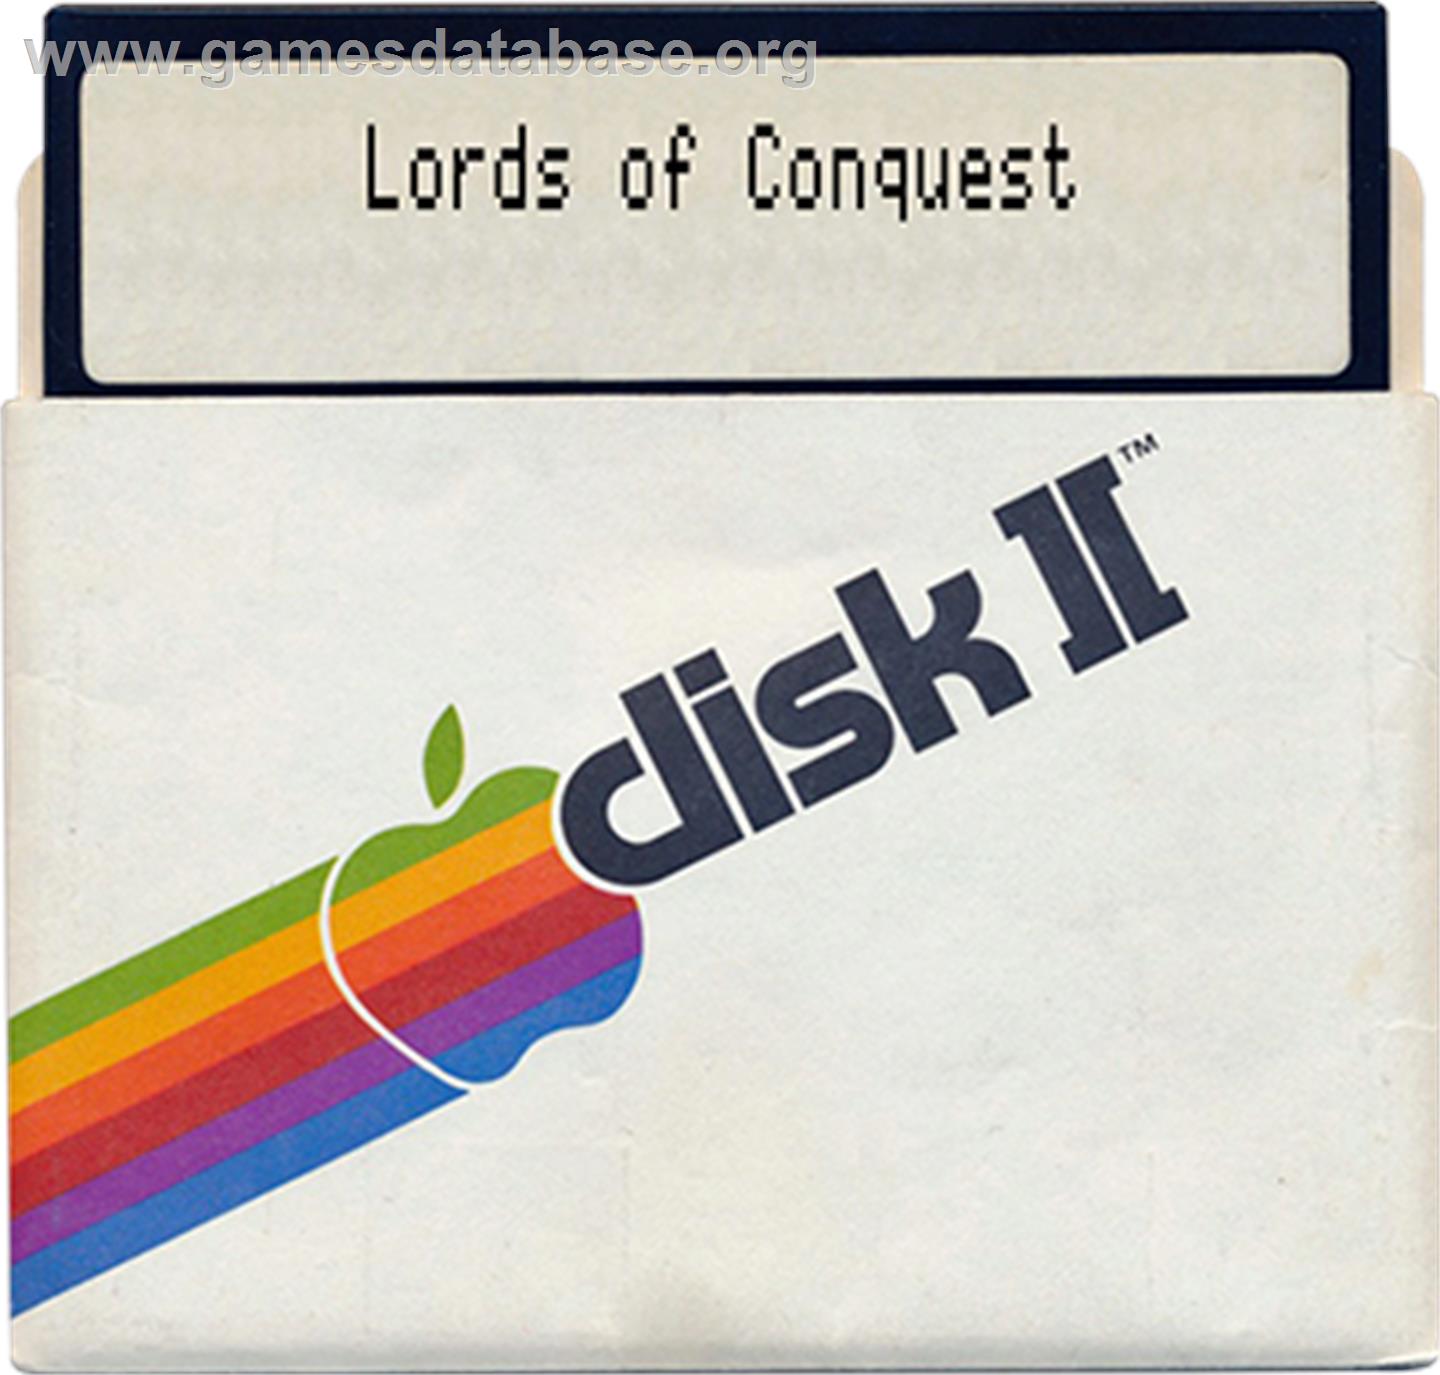 Lords of Conquest - Apple II - Artwork - Disc